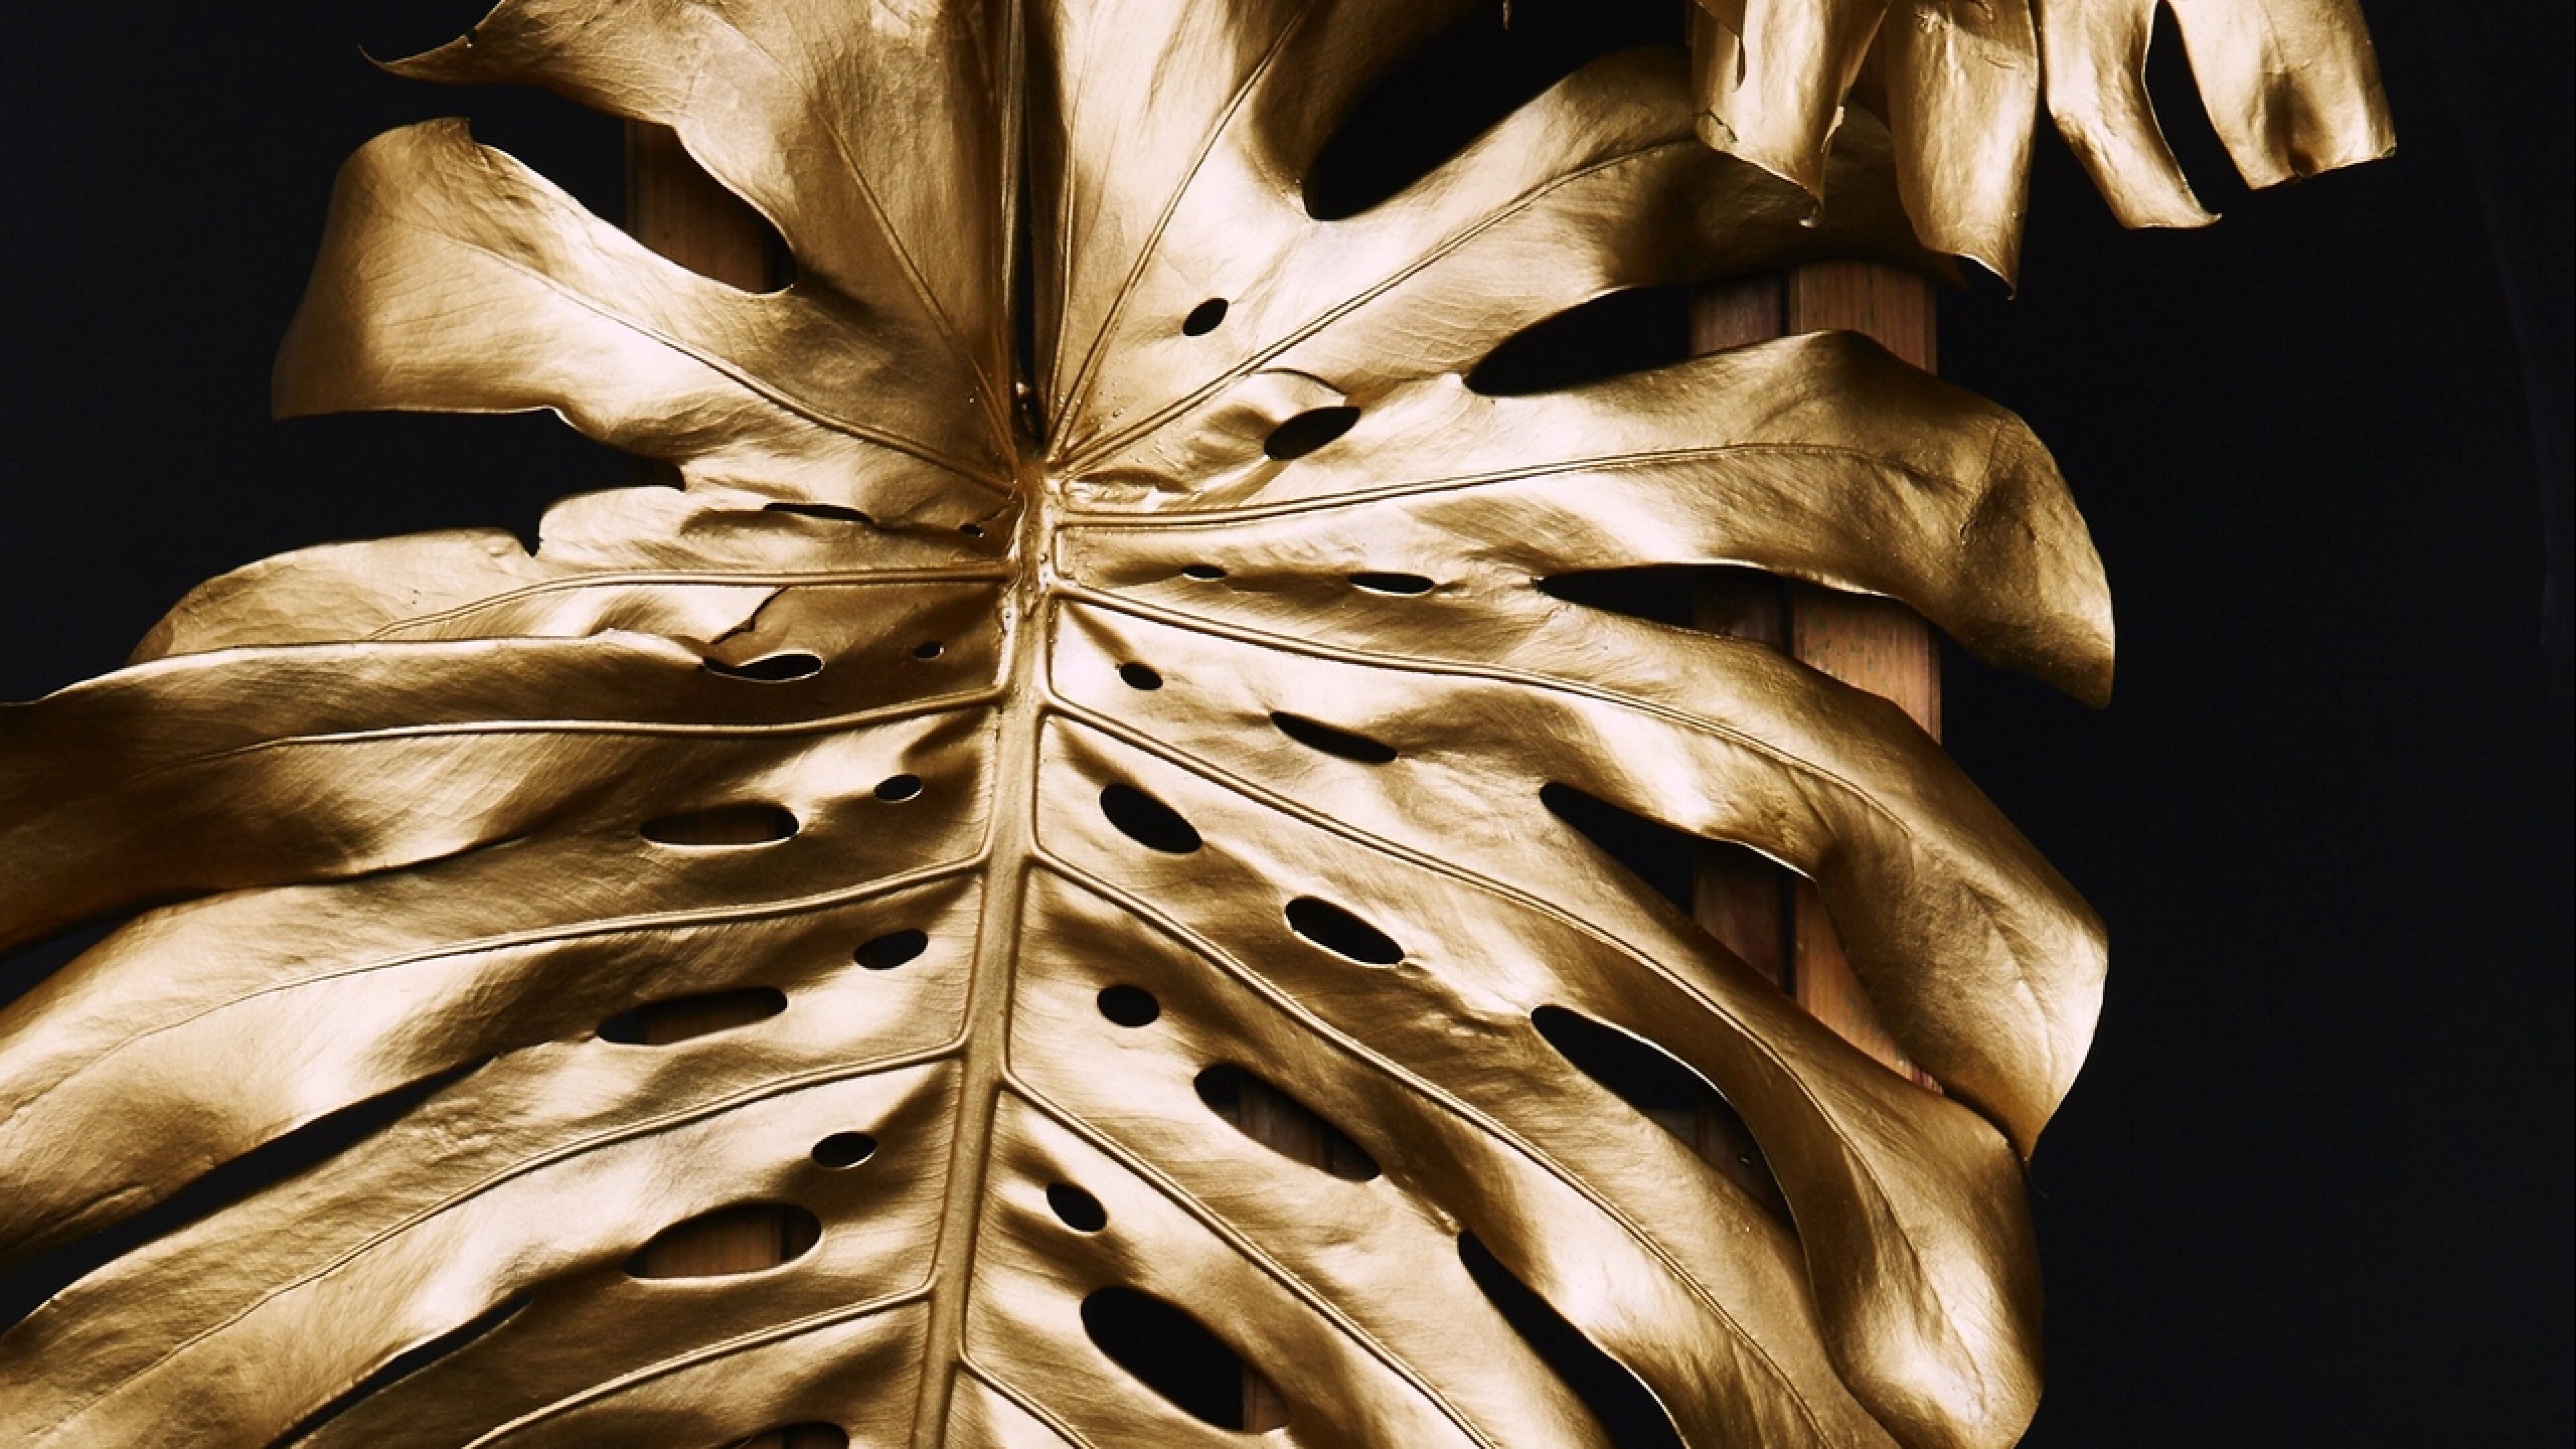 Gold Leaf: Golden monstera leaves, Palm for home decoration, Araceae, The plant from tropical regions. 3840x2160 4K Background.